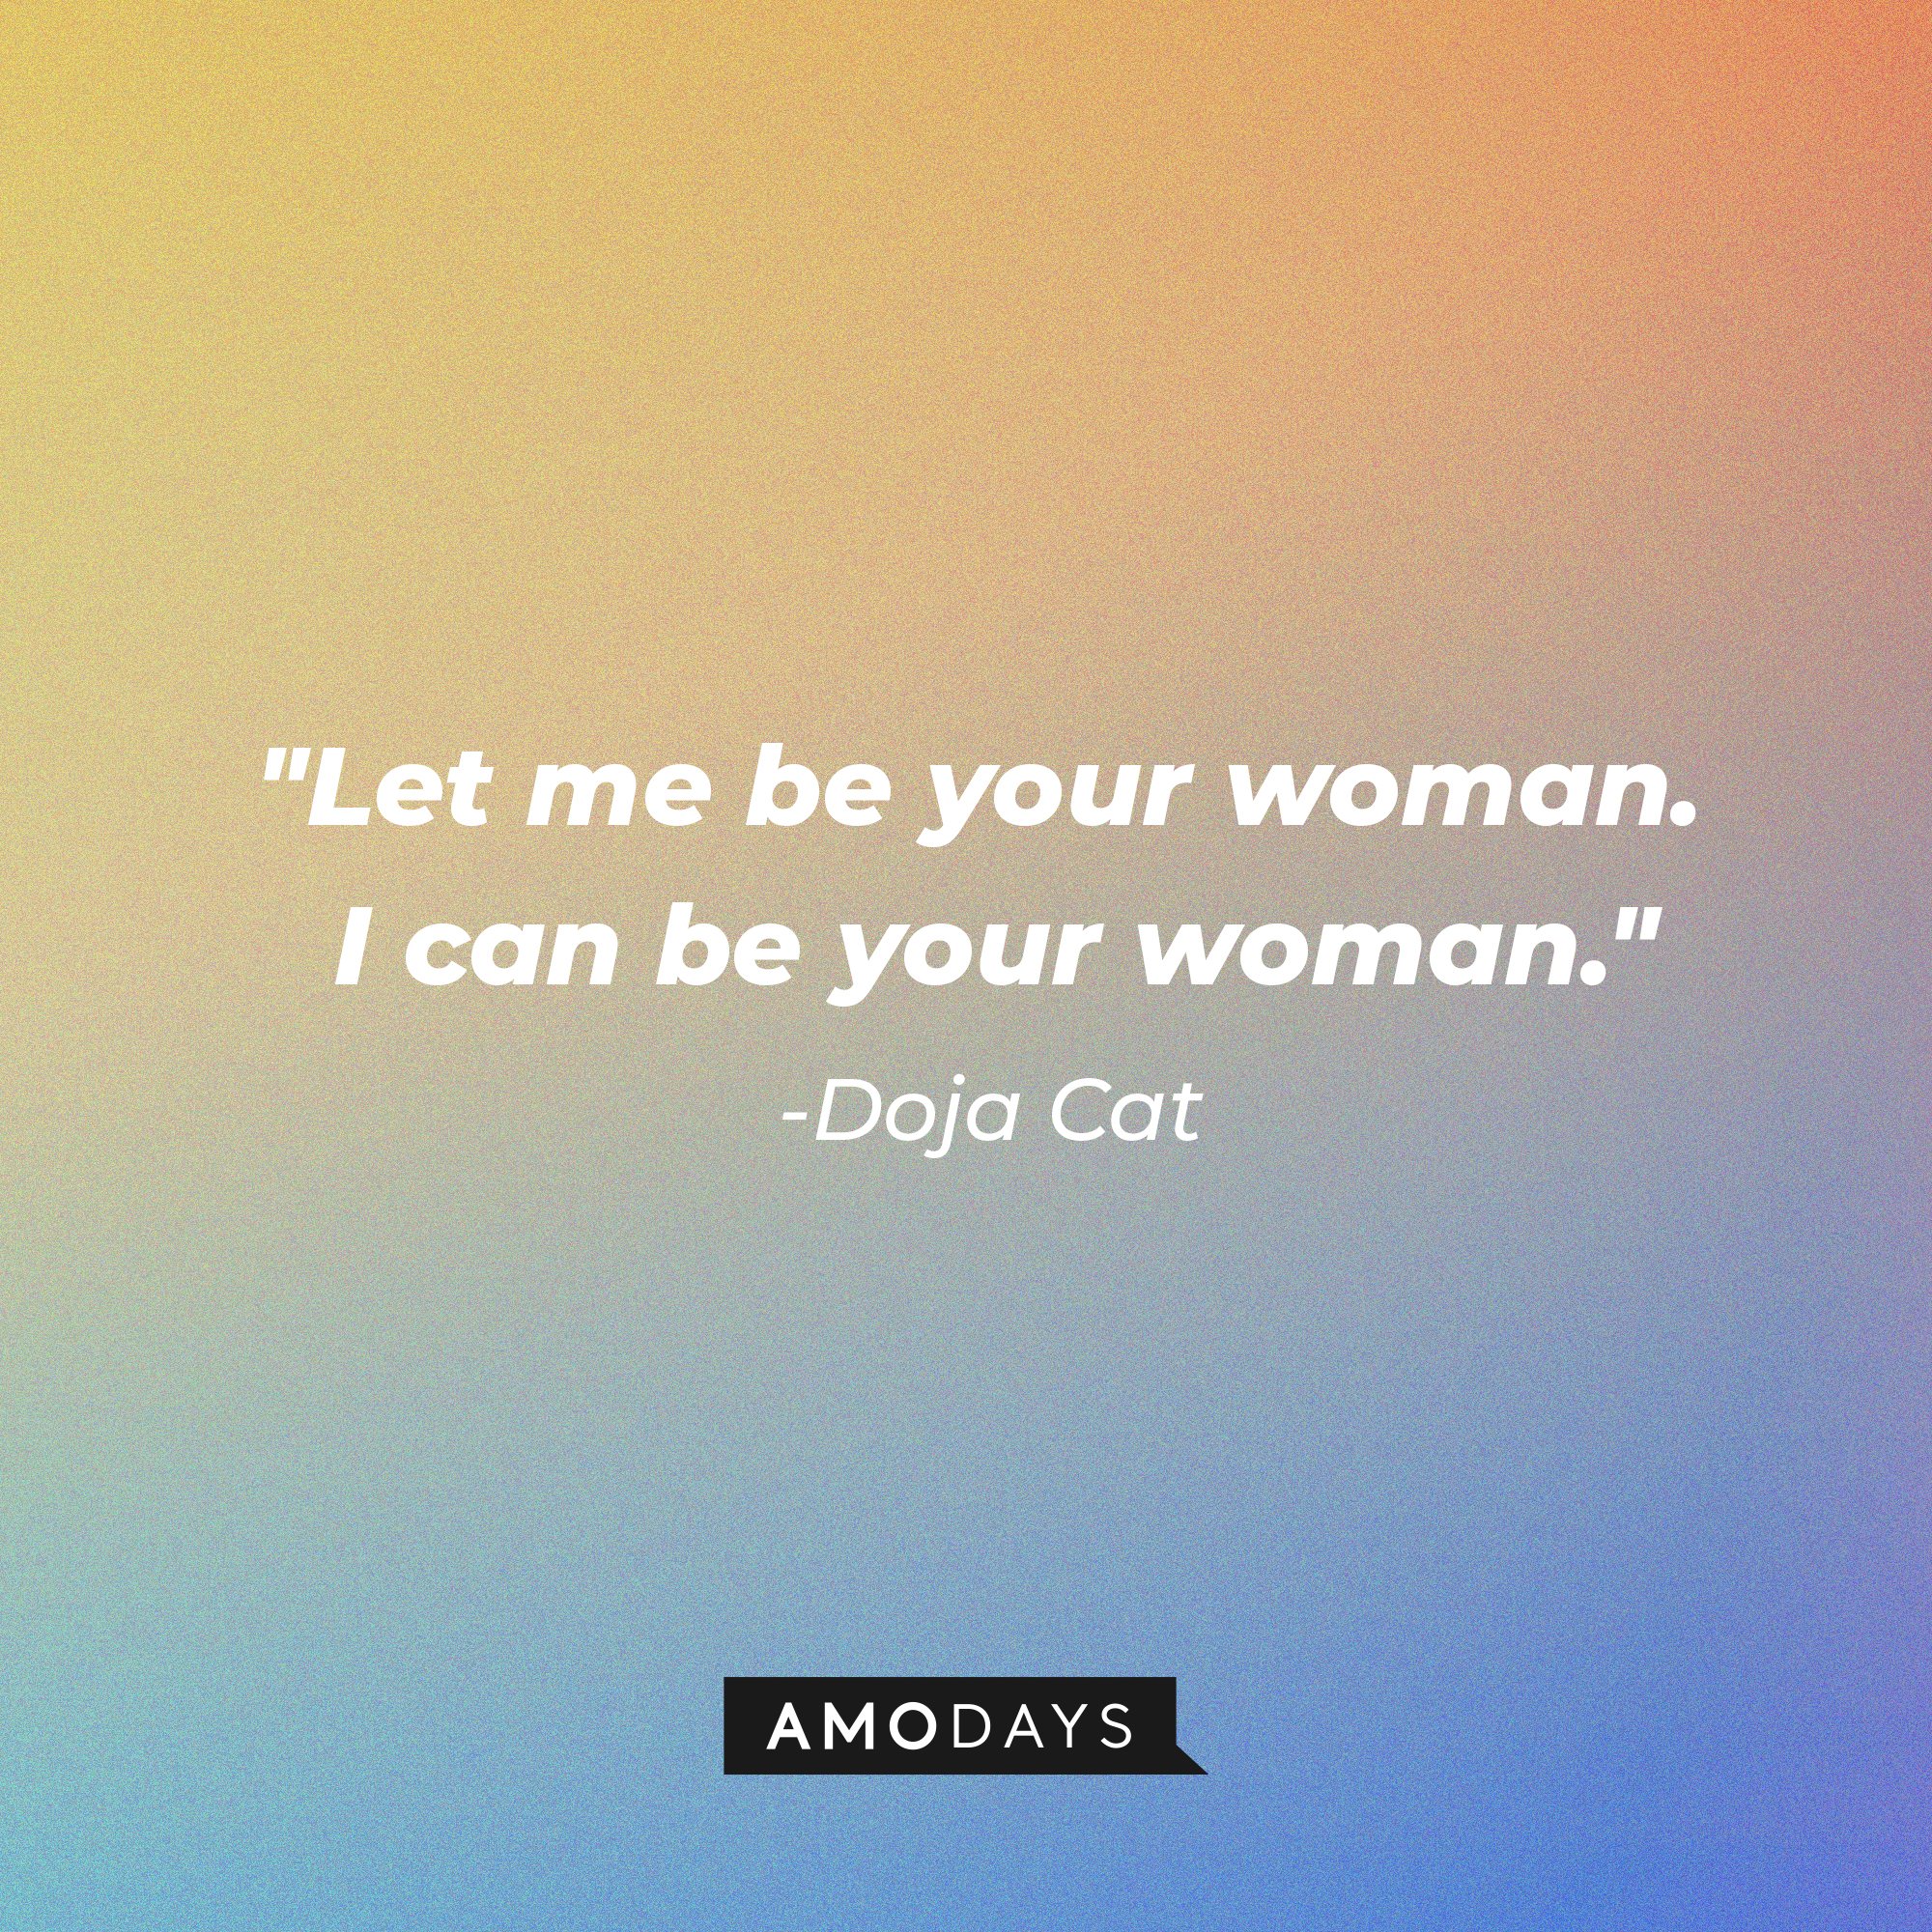 Doja Cat's quote: "Let me be your woman. I can be your woman." | Image: AmoDays